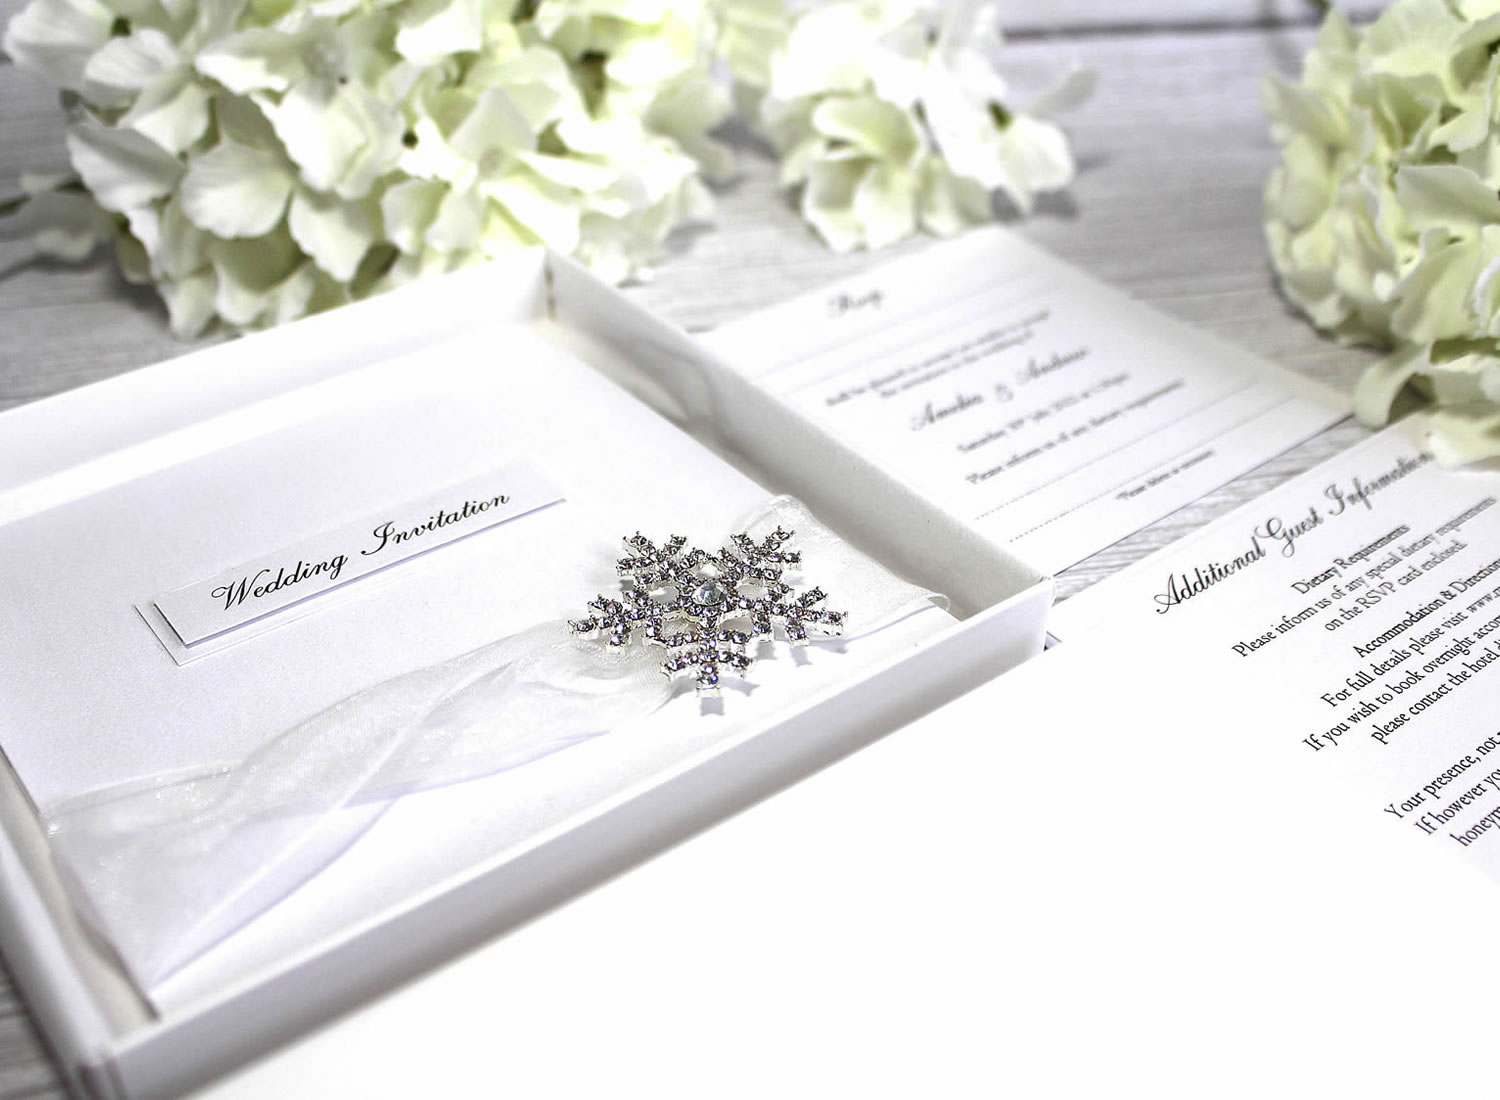 https://www.no9designs.co.uk/diamante-collection-luxury-wedding-stationery/